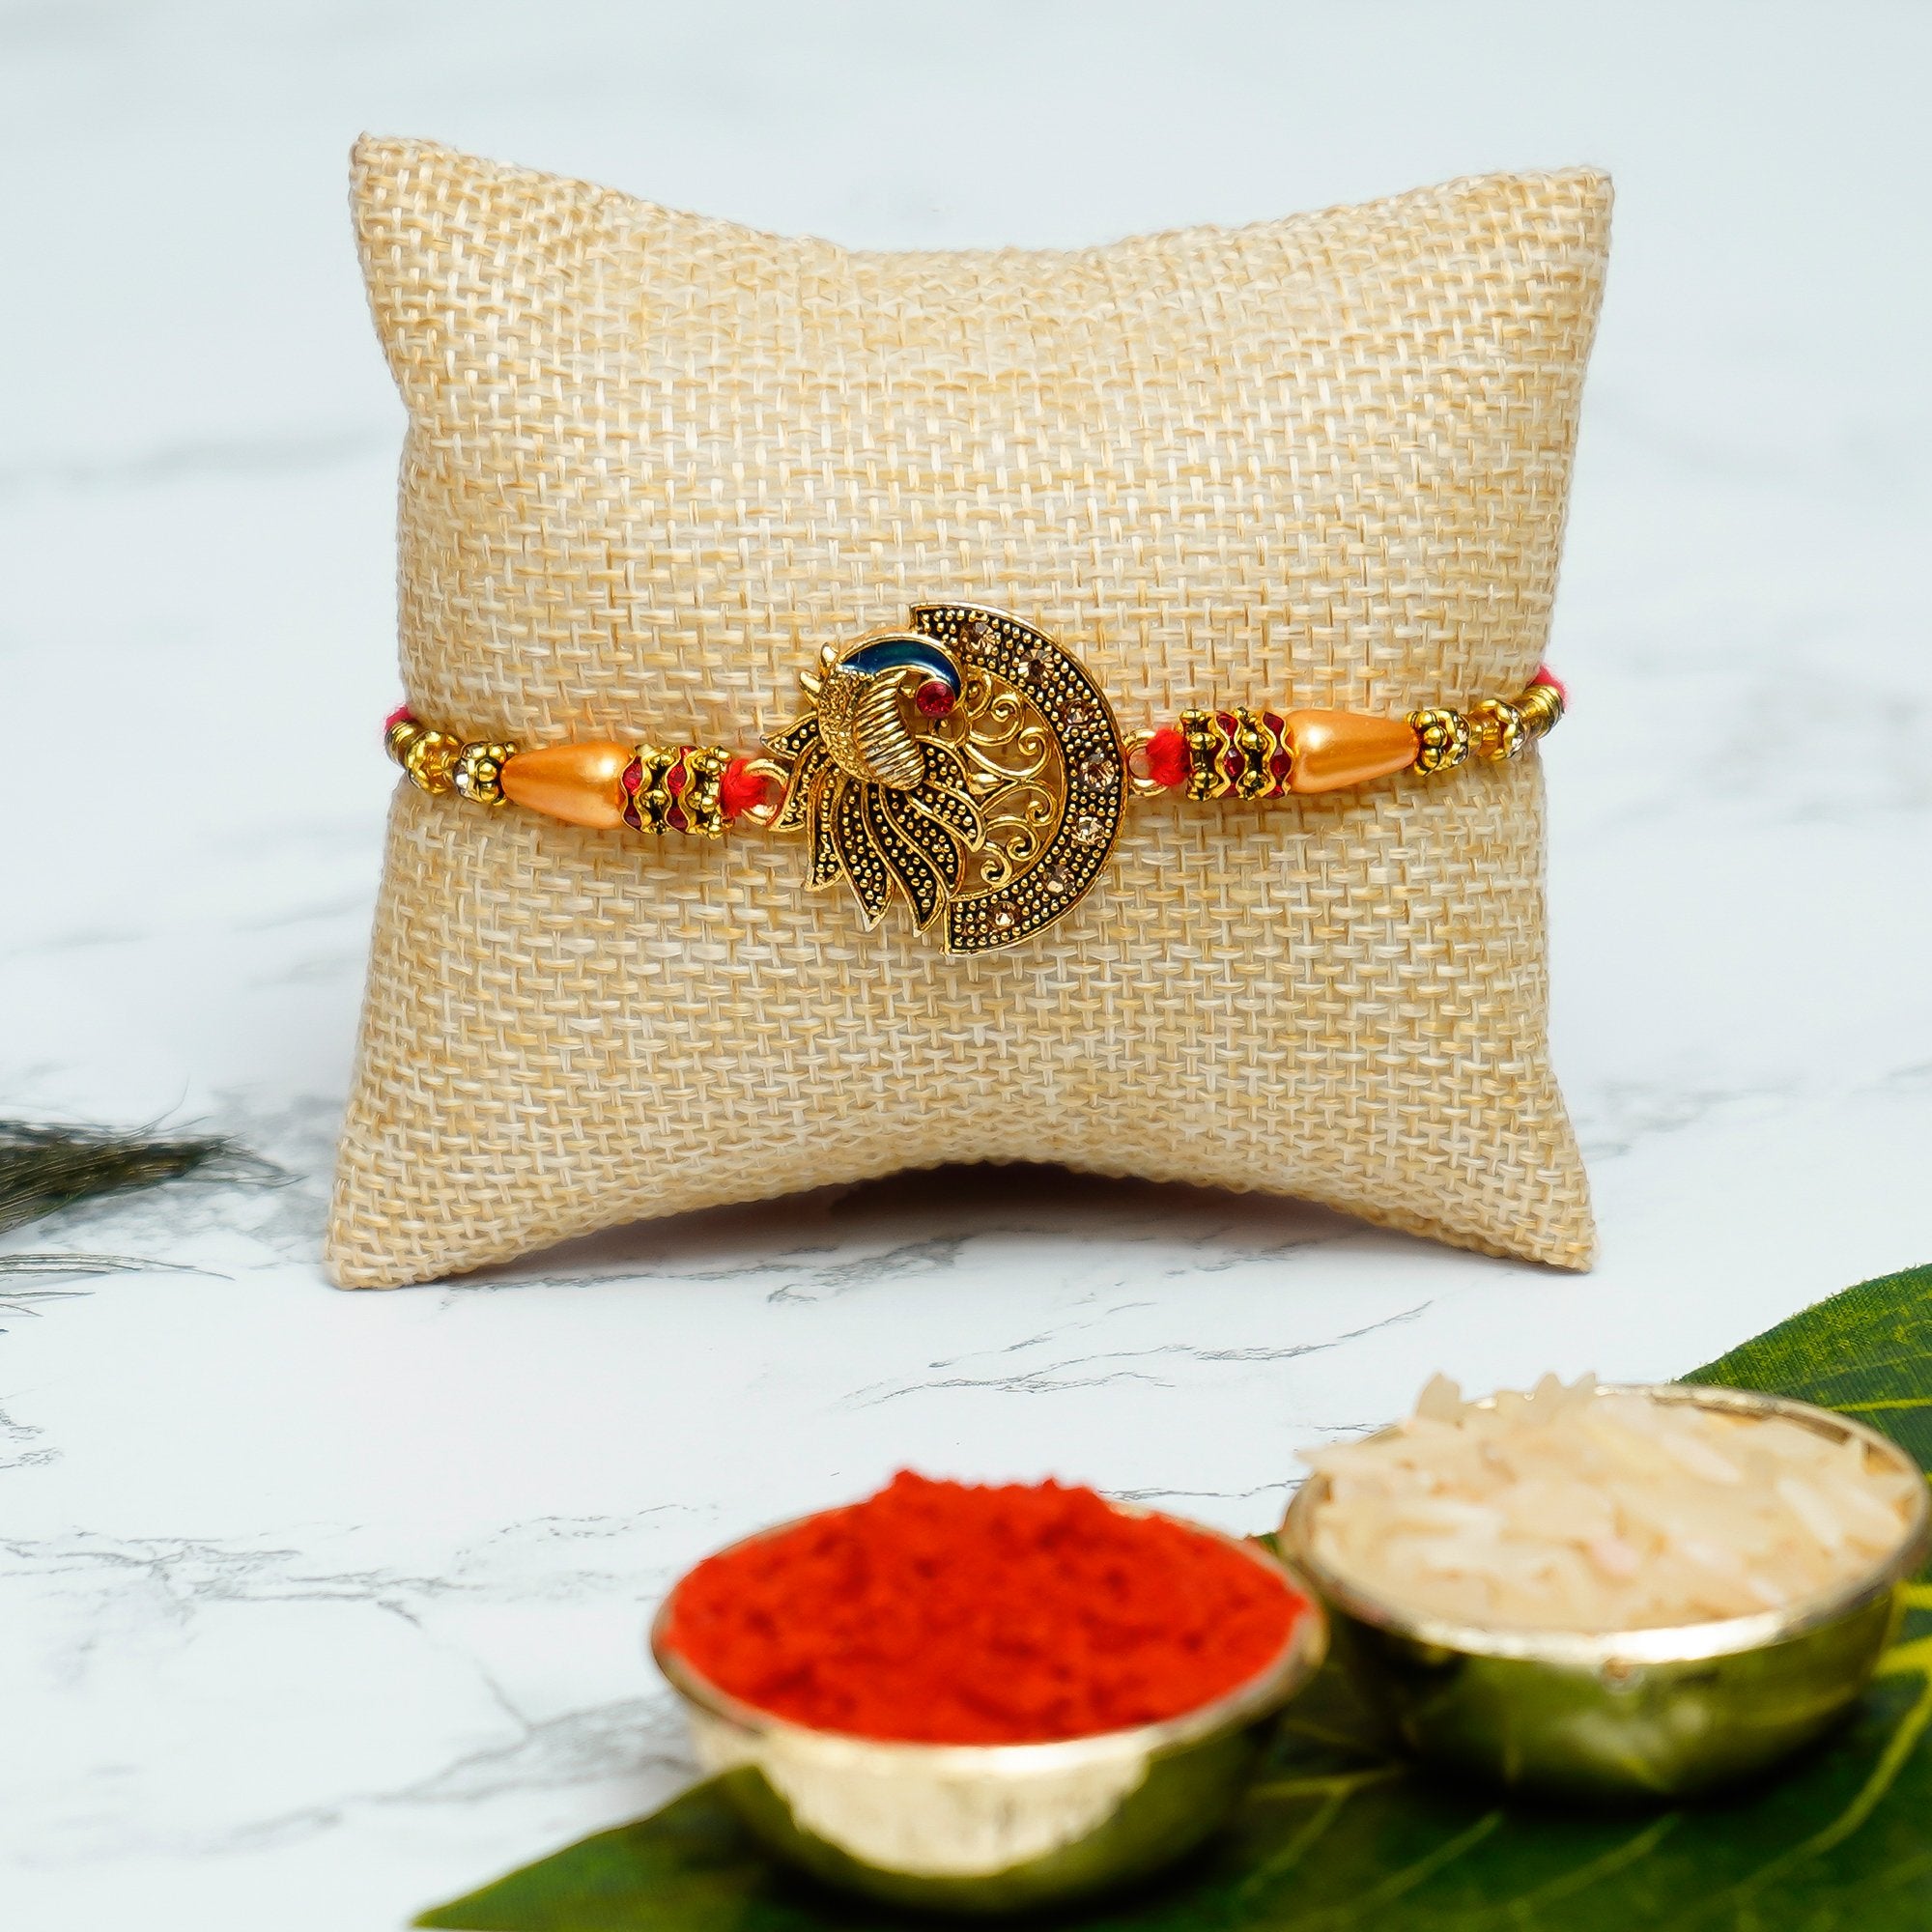 Designer Peacock Rakhi with Antique Finish Decorative Brass Elephant Fingurine and Roli Chawal Pack, Best Wishes Greeting Card 1